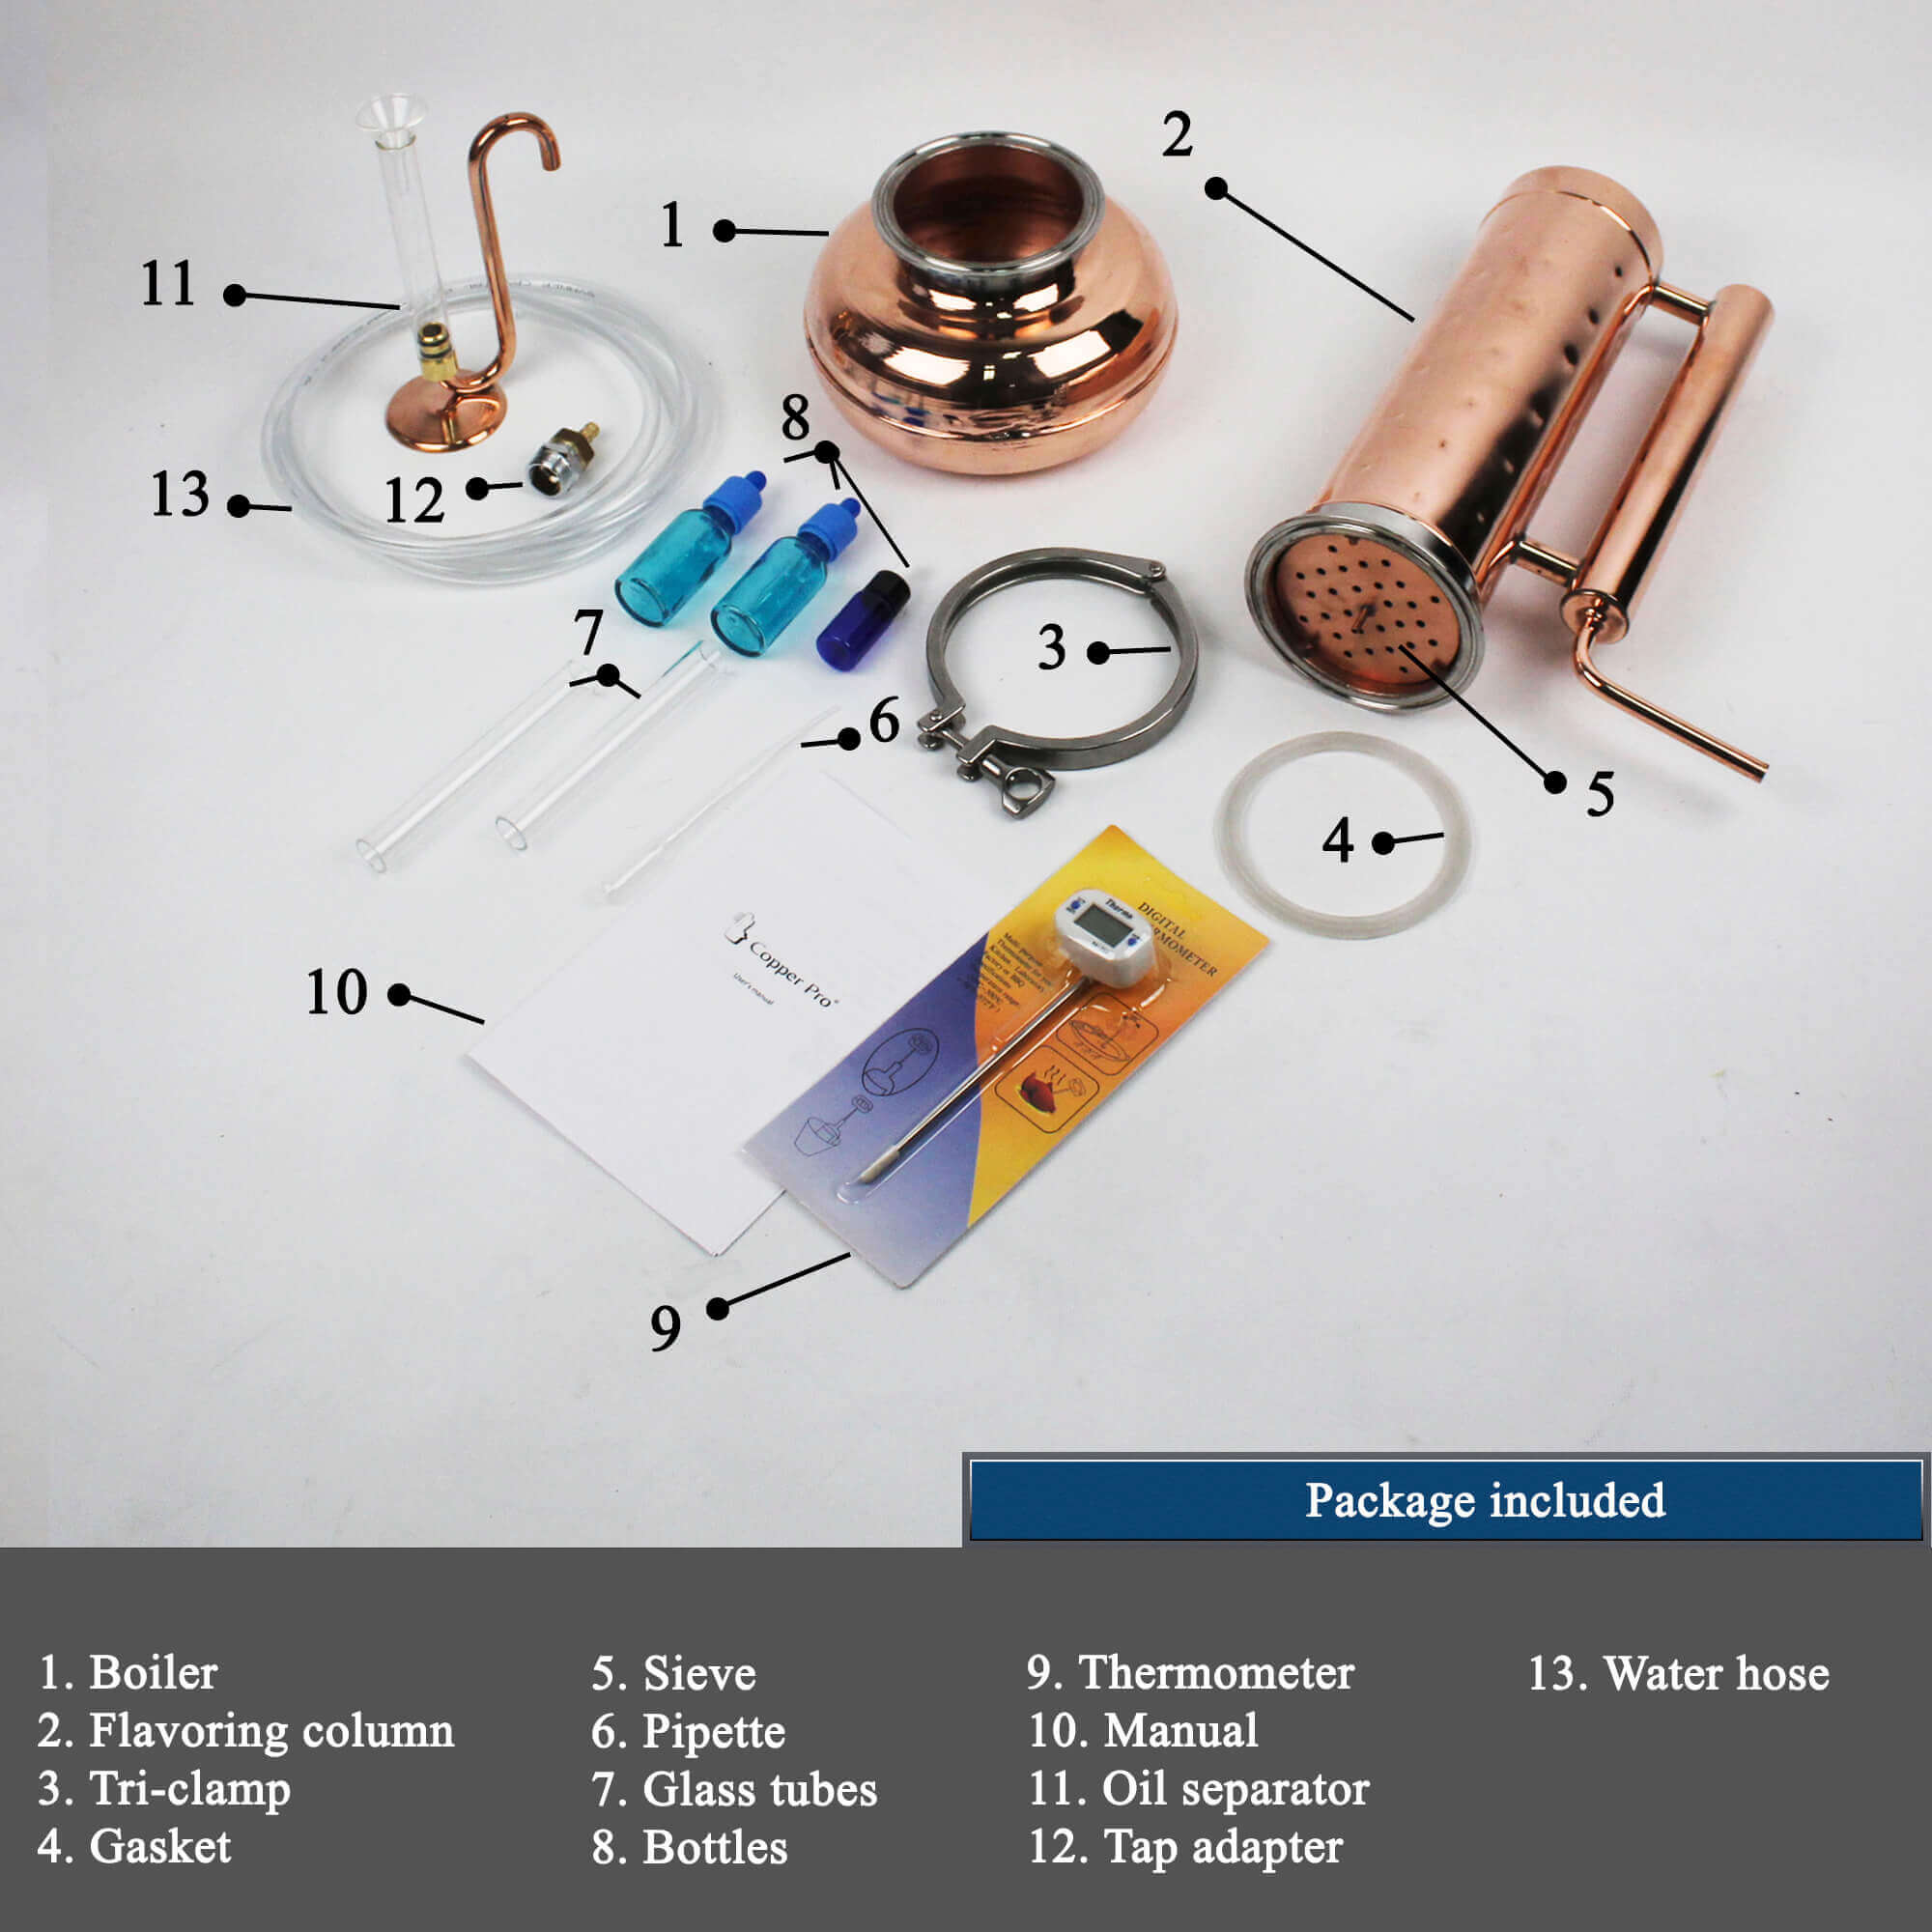 copper distiller. parts in the package